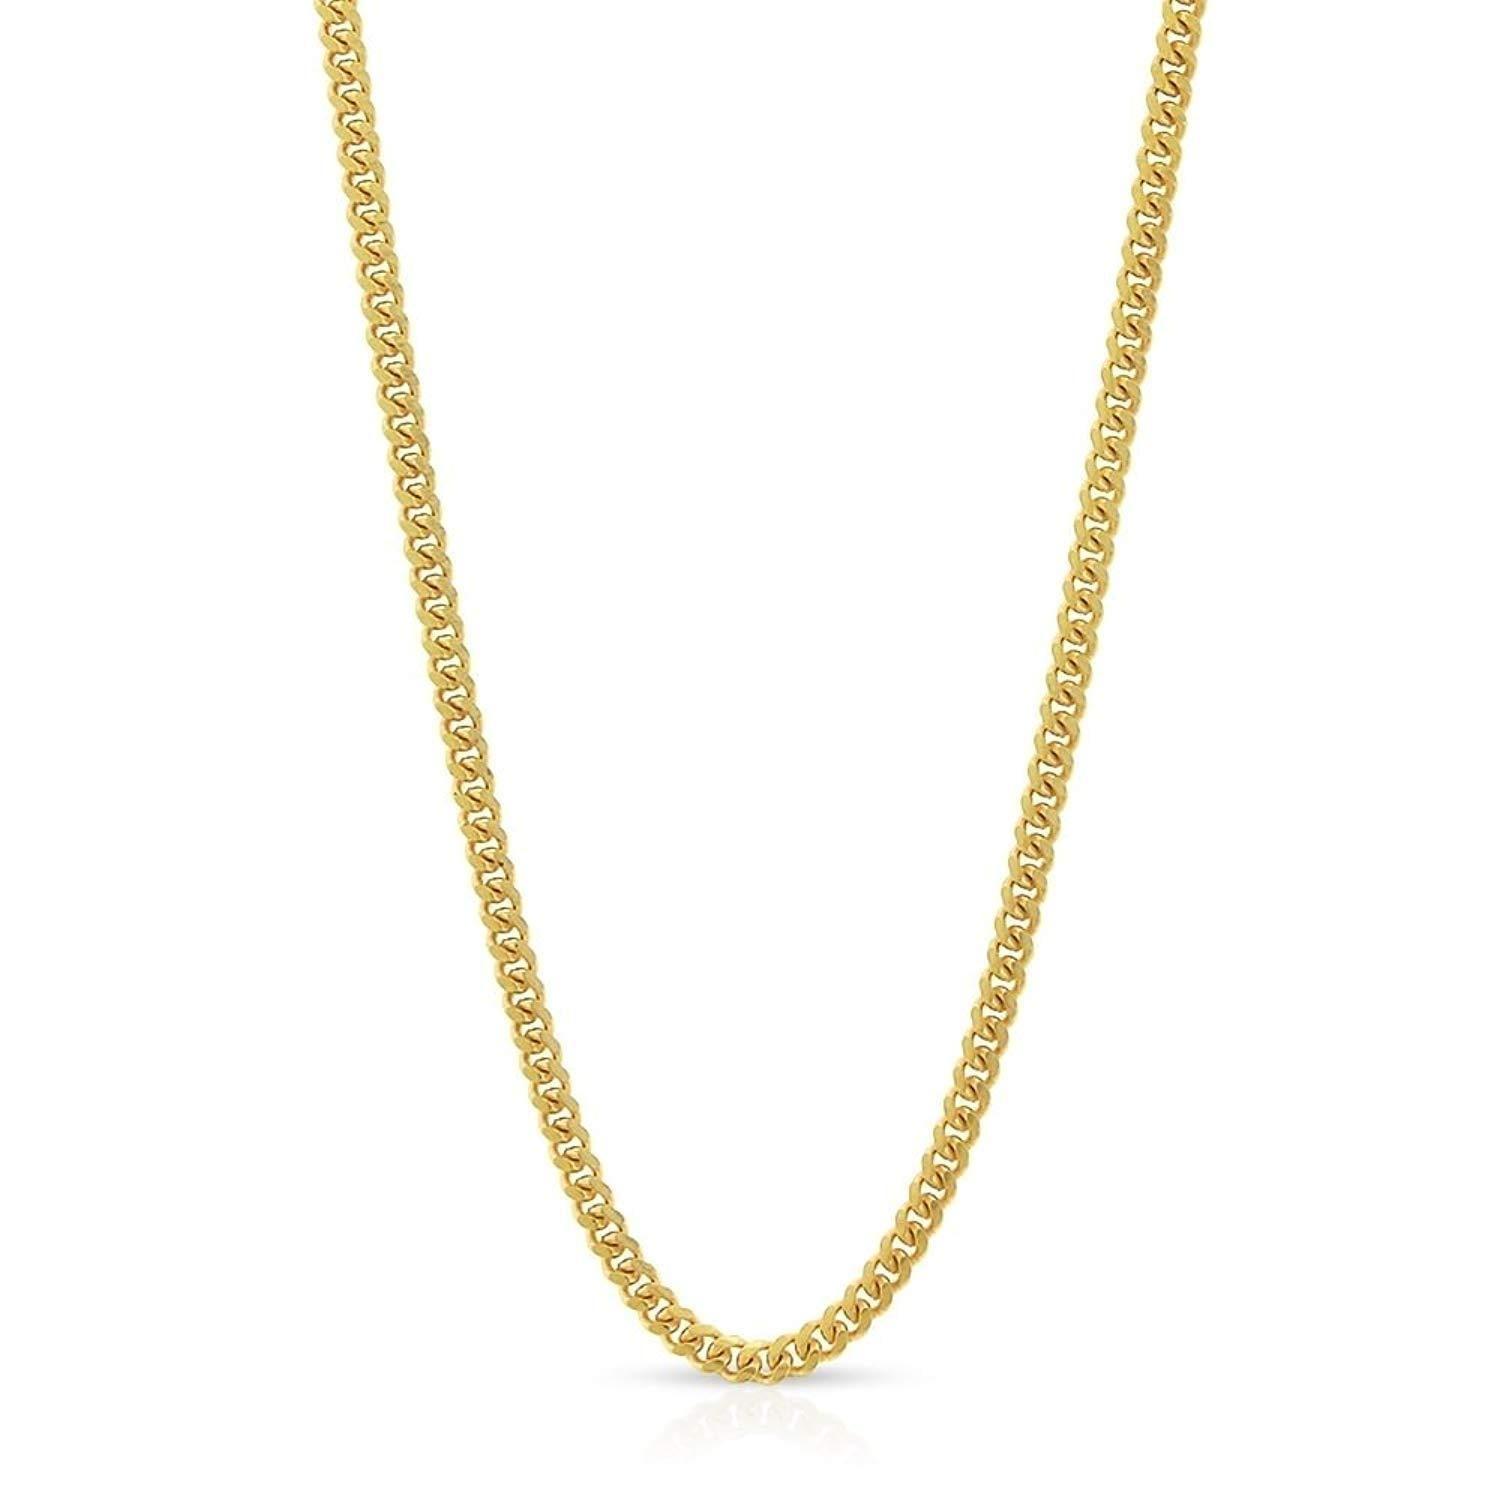 10K Yellow Gold Solid Miami Cuban Curb Link Necklace Chains 1MM - 5MM, 16" - 30", Gold Chain for Men & Women, 100% Real 10K Gold, Next Level Jewelry